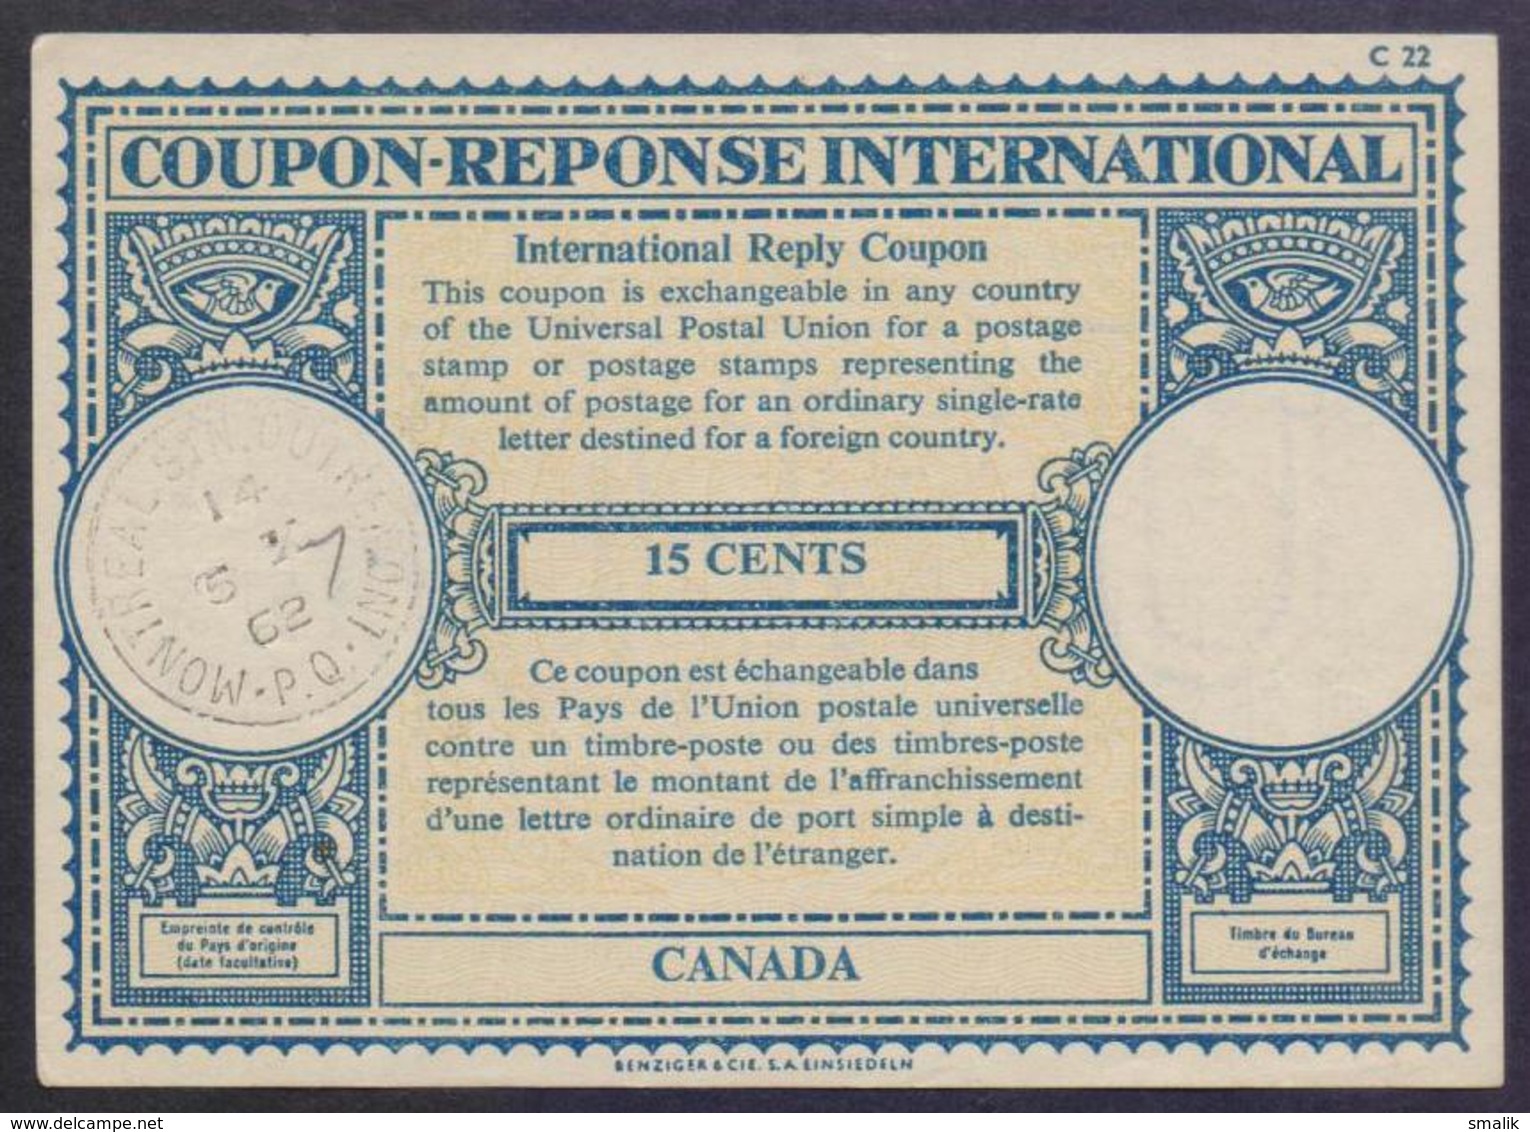 CANADA - 15 Cents London Type IRC COUPON REPONSE INTERNATIONAL REPLY, UPU, Cancelled 5.10. 1962 - Coupons-Réponses